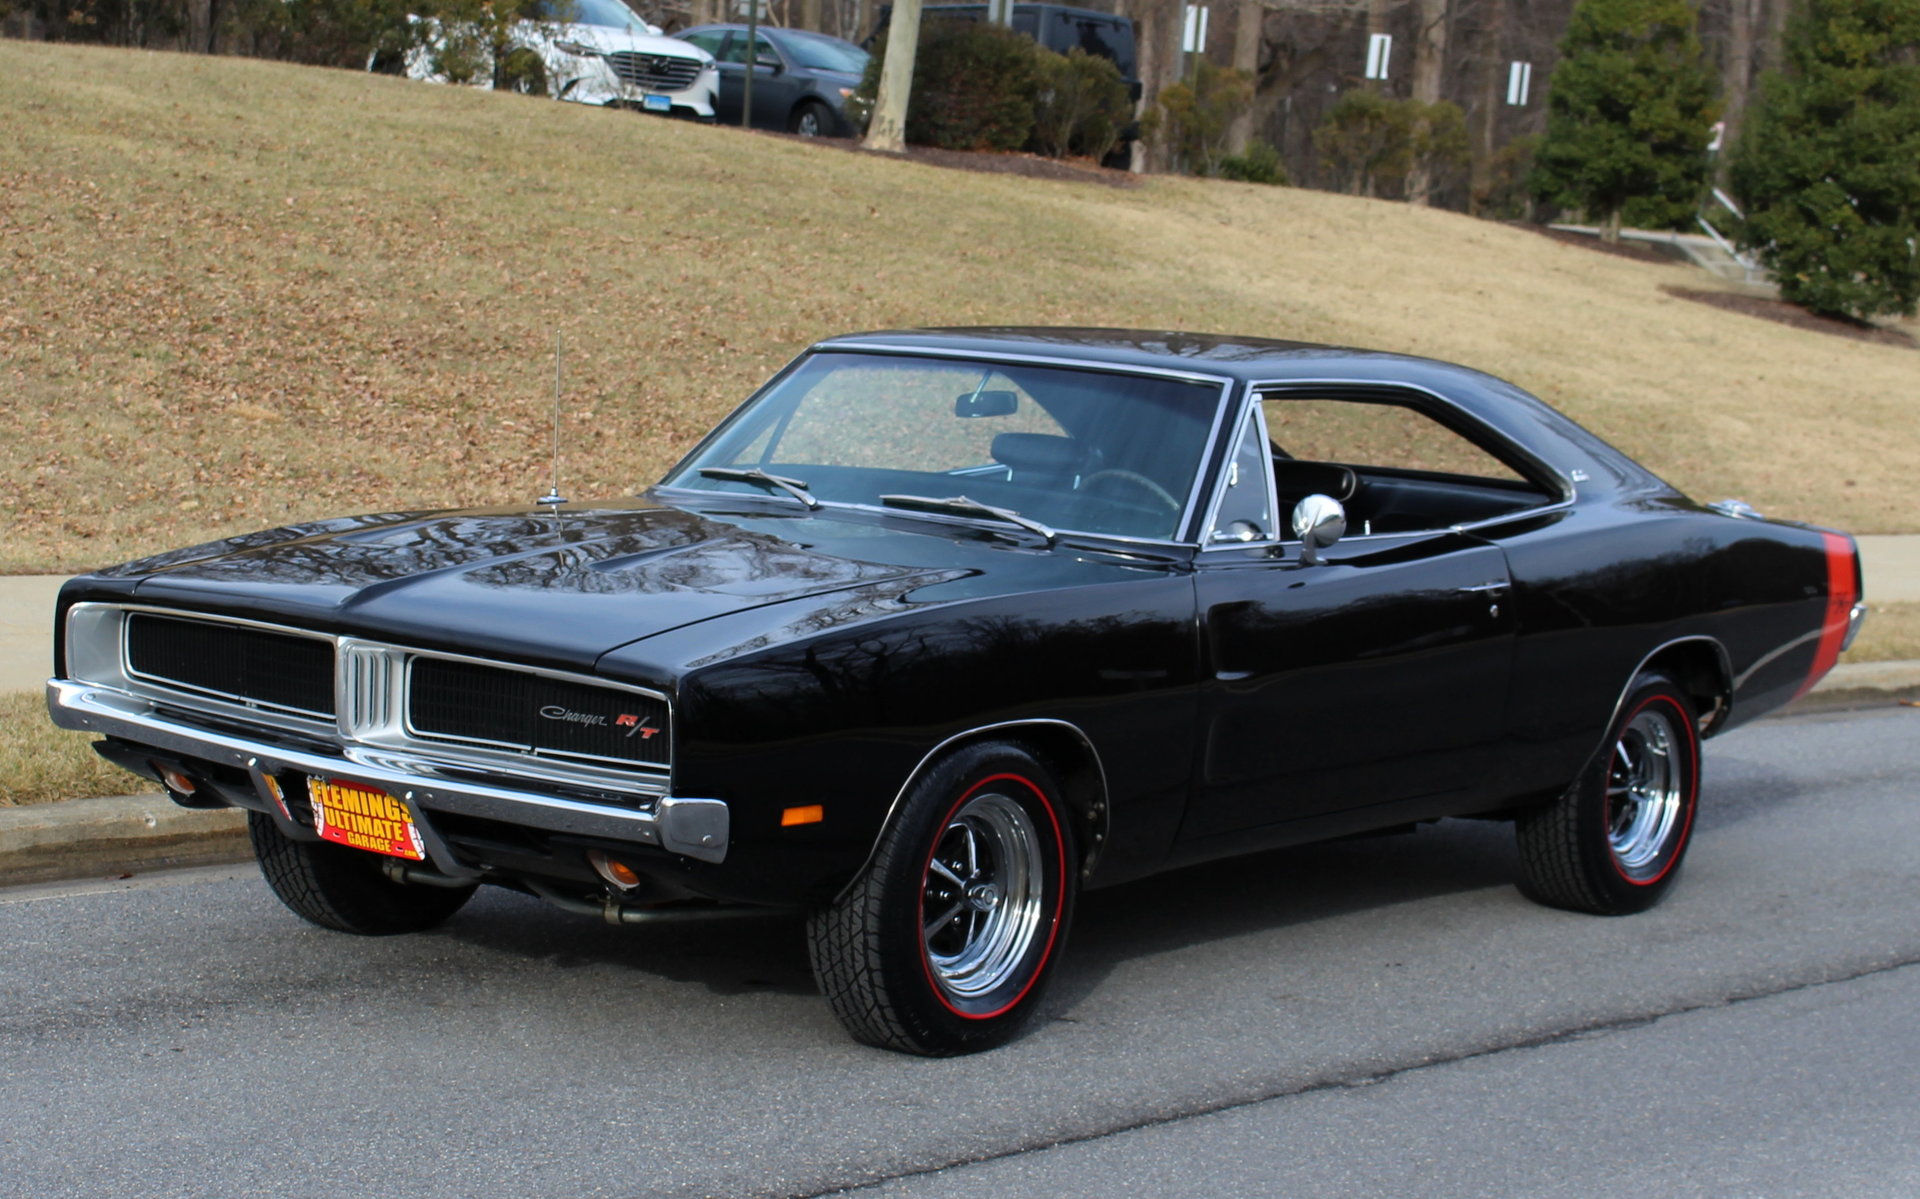 Dodge Charger RT 1969